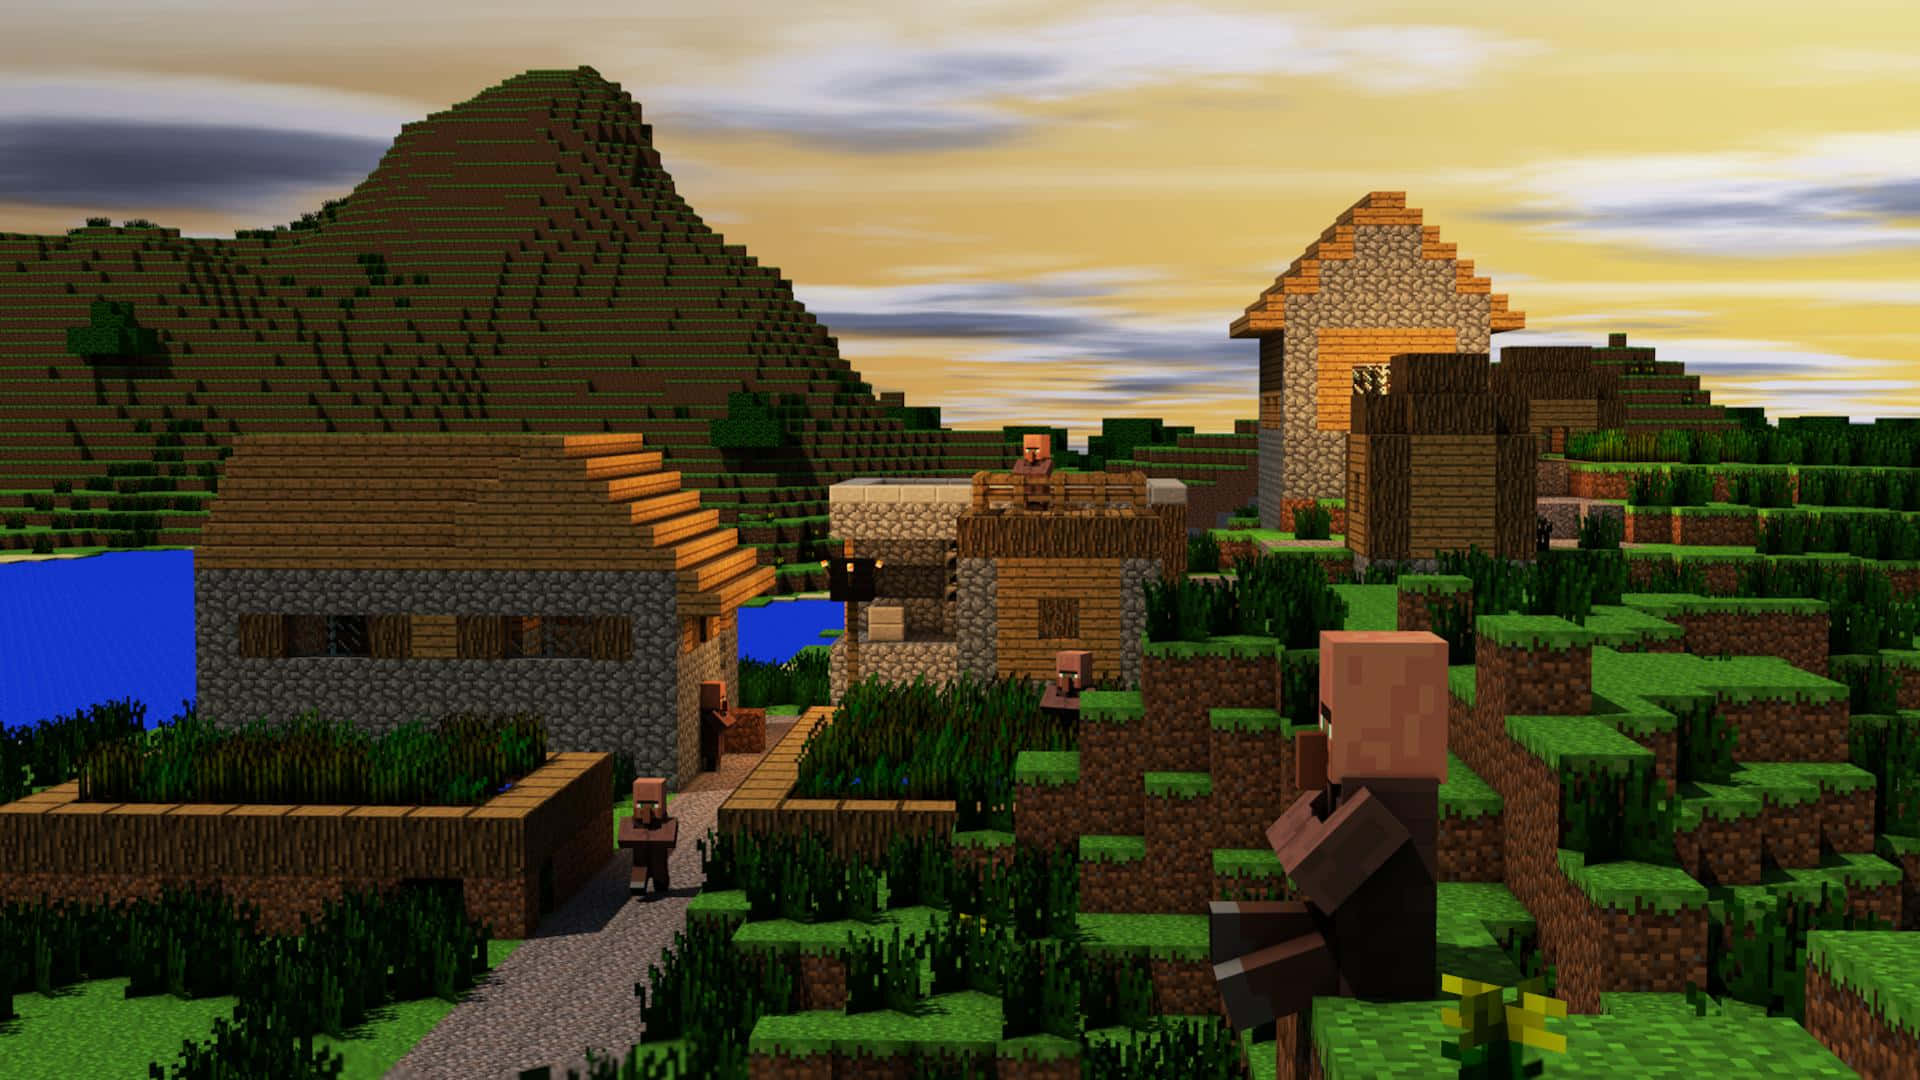 A picturesque Minecraft village nestled in a lush green landscape Wallpaper